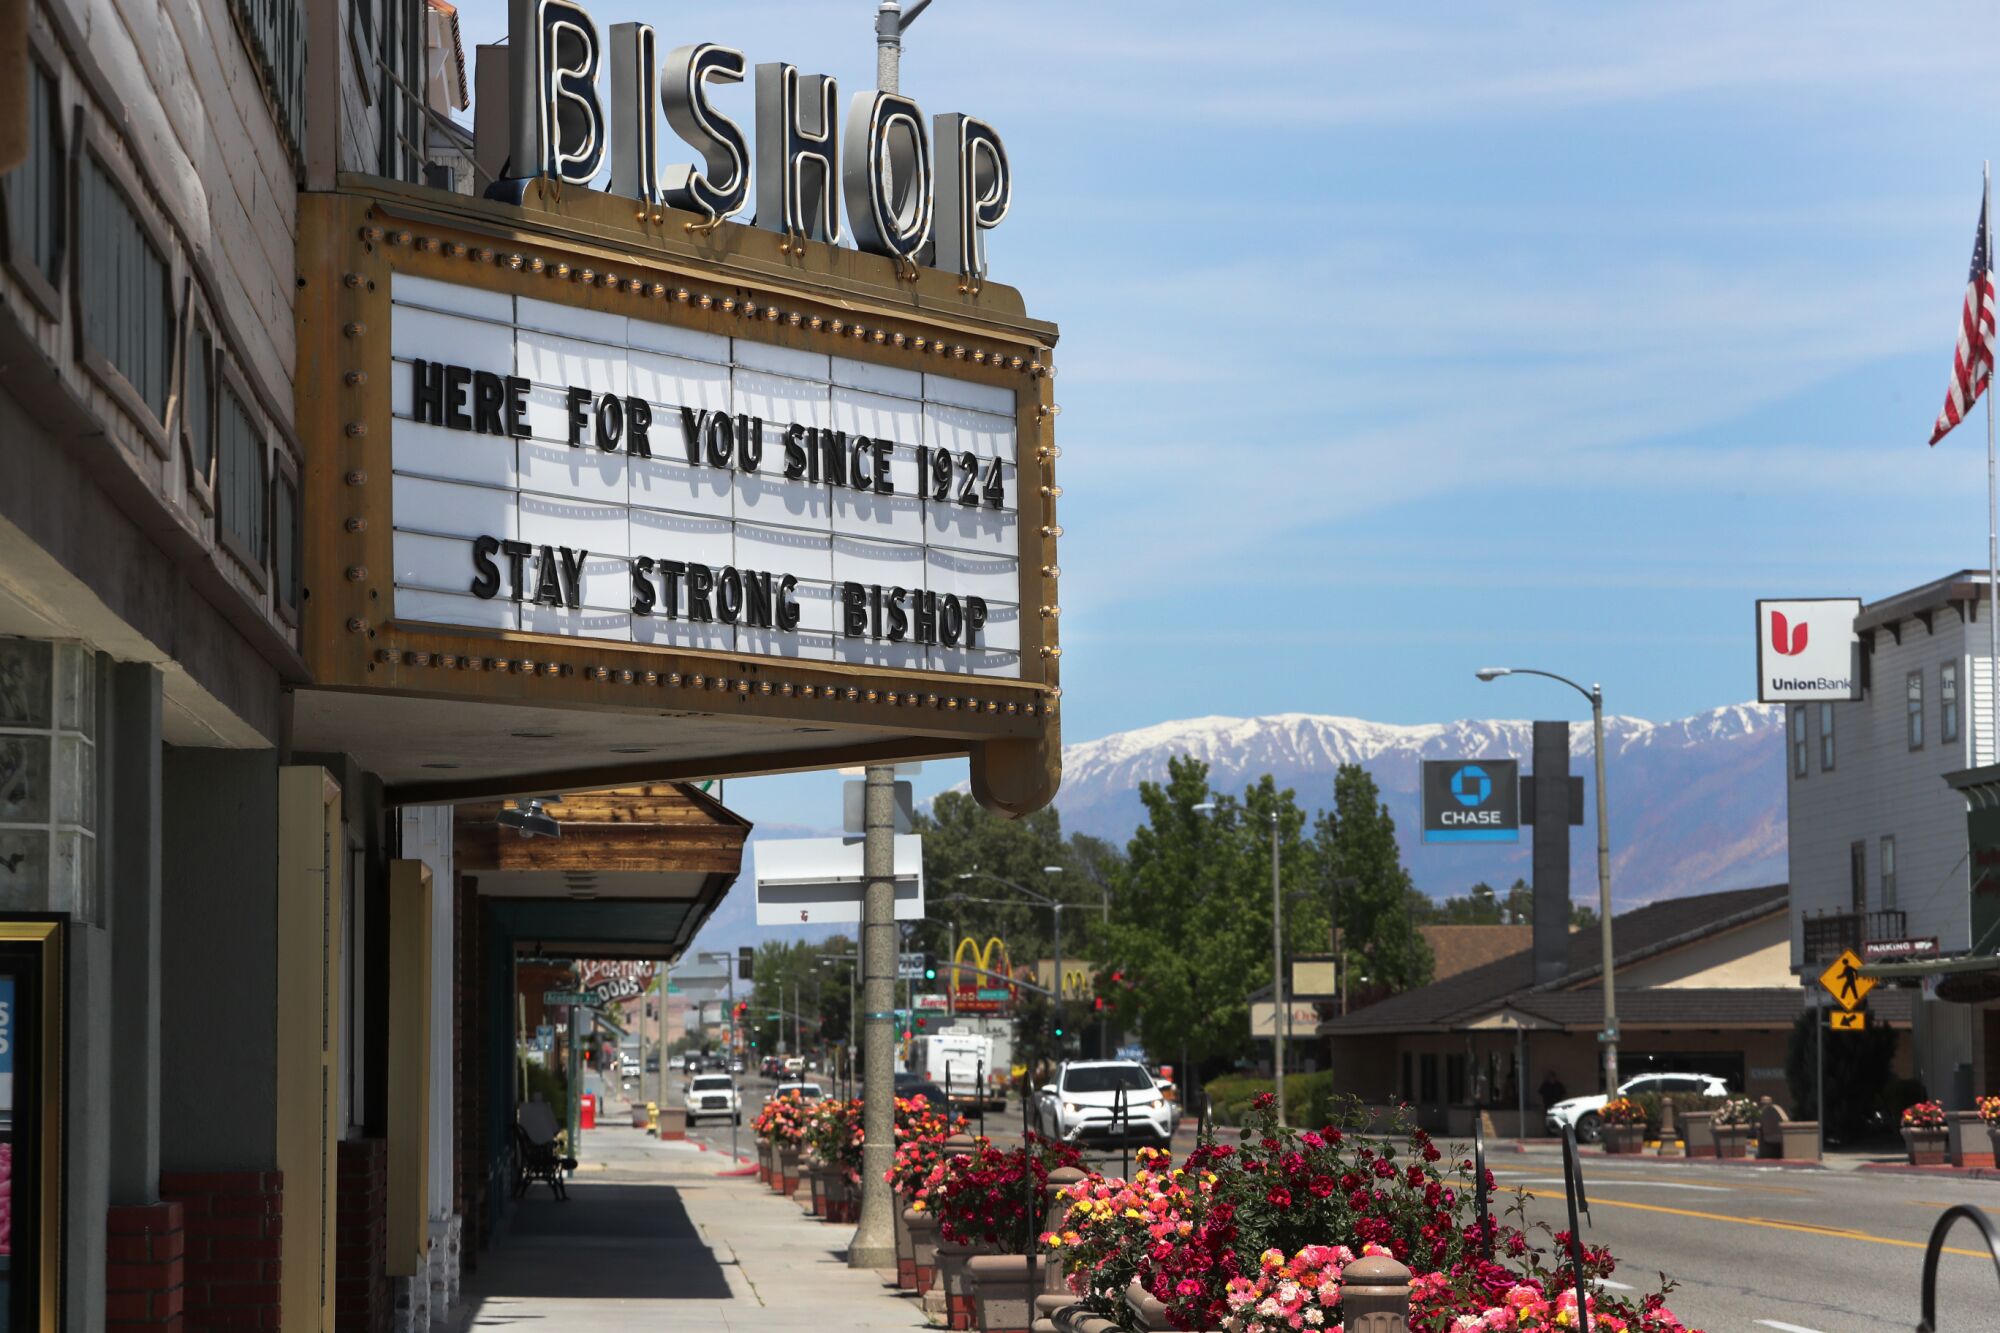 A view of Bishop, Calif. Small-business owners along the 395 corridor are dealing with closures and pondering what happens next as California eases restrictions.